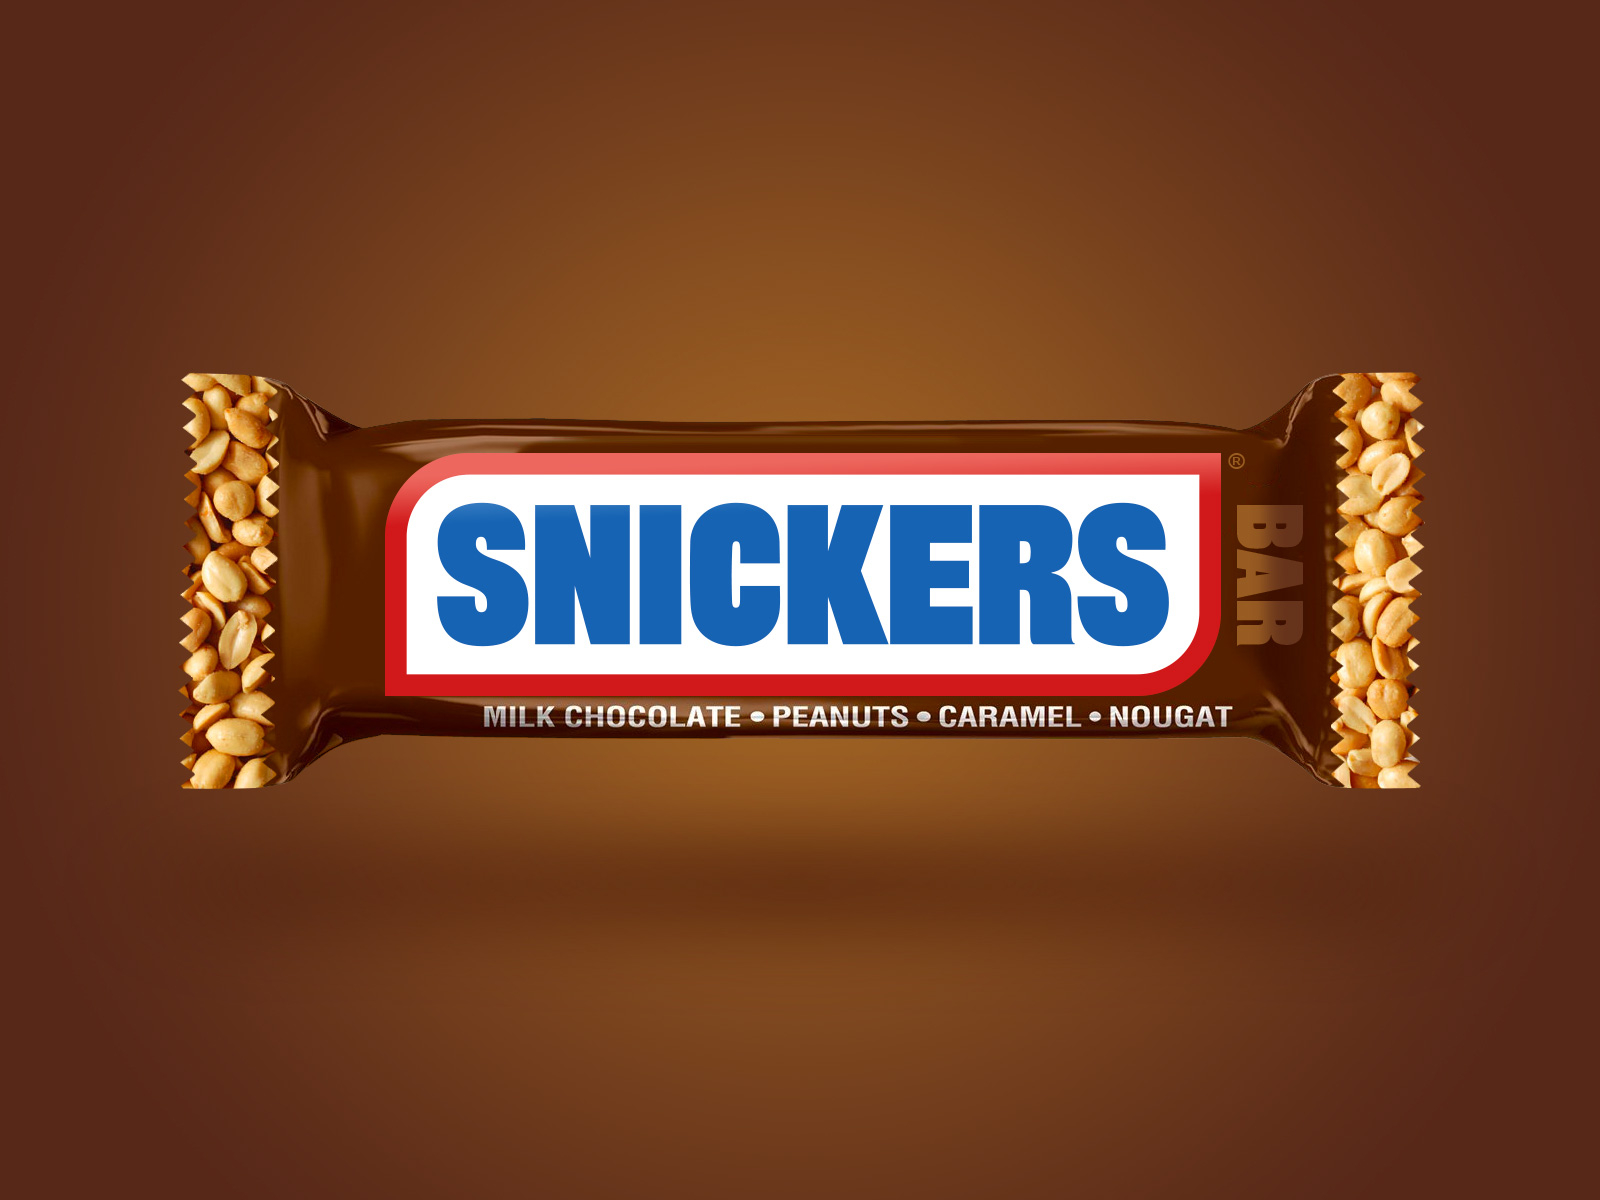 A snicka than thicker 